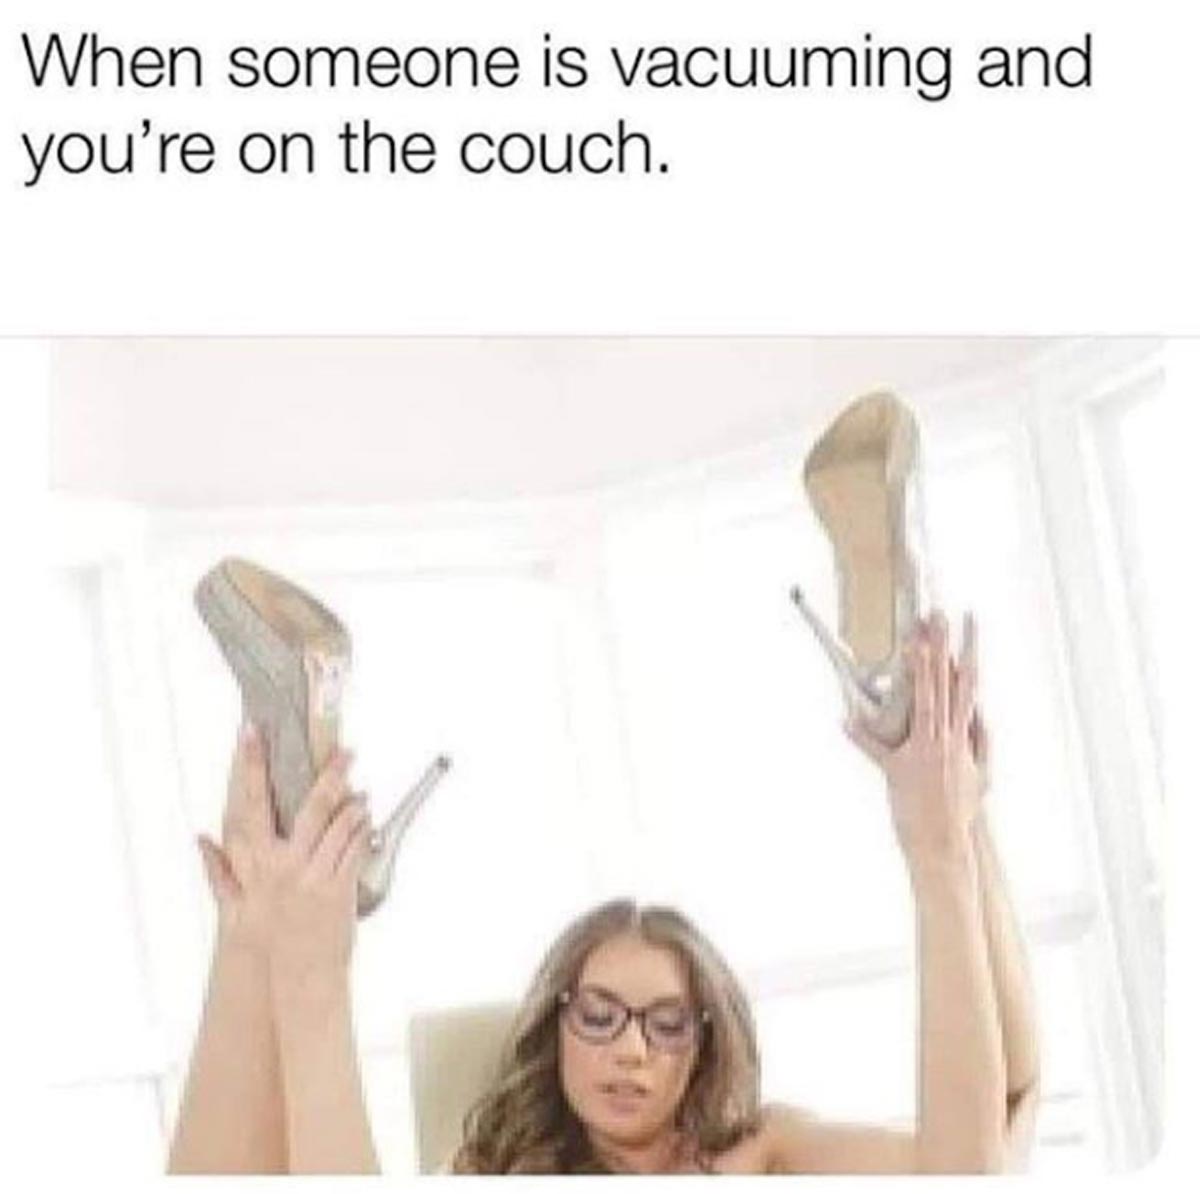 funny sex memes - someone is vacuuming and you re - When someone is vacuuming and you're on the couch.